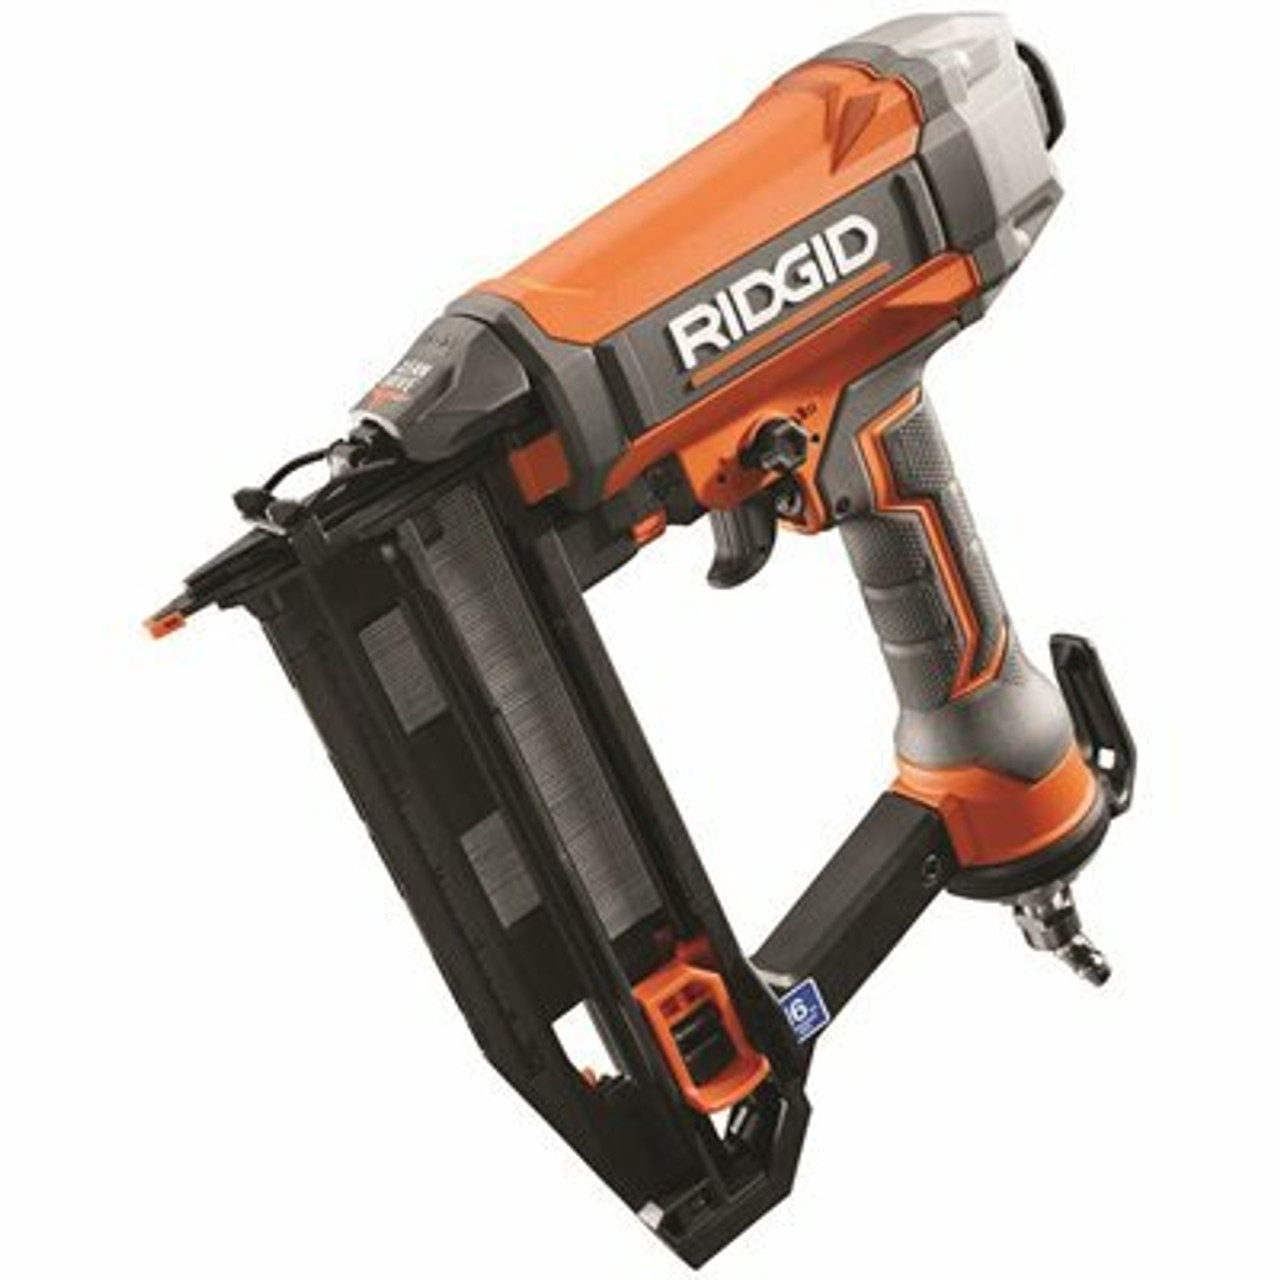 Ridgid Pneumatic 16-Gauge 2-1/2 In. Straight Finish Nailer With Clean Drive Technology